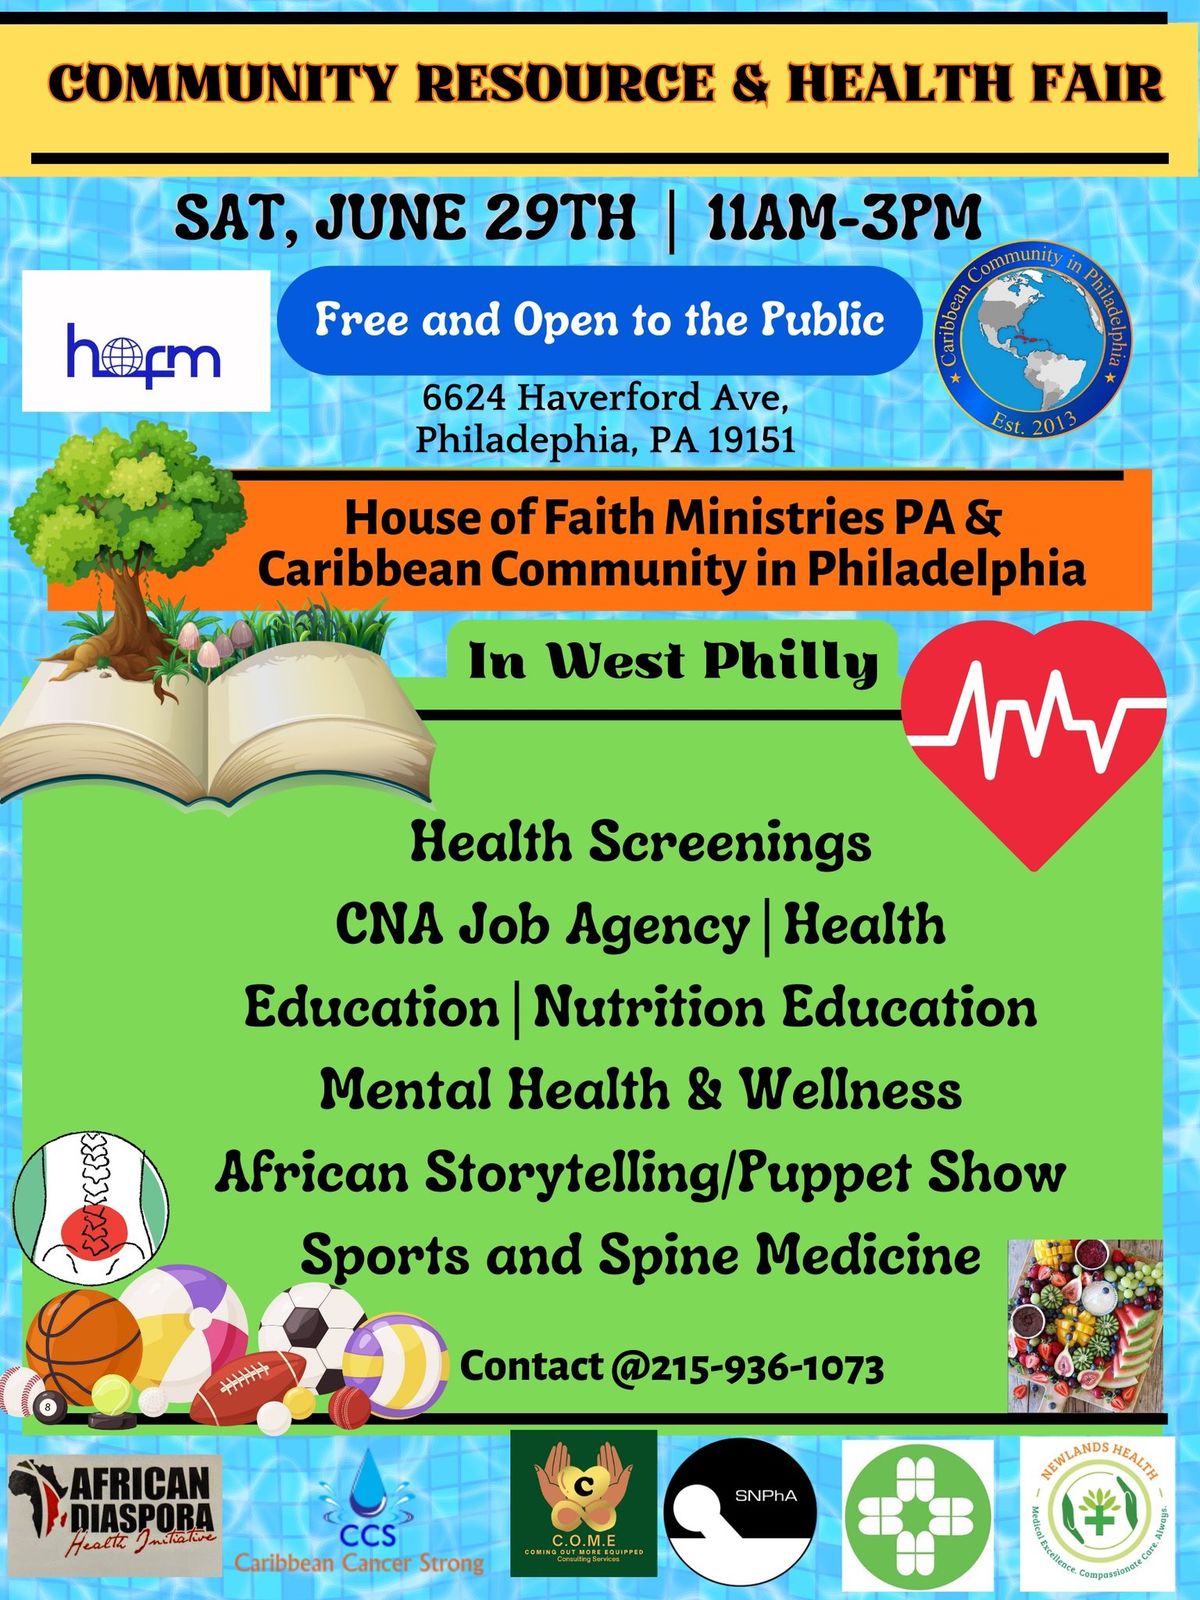 COMMUNITY RESOURCE AND HEALTH FAIR